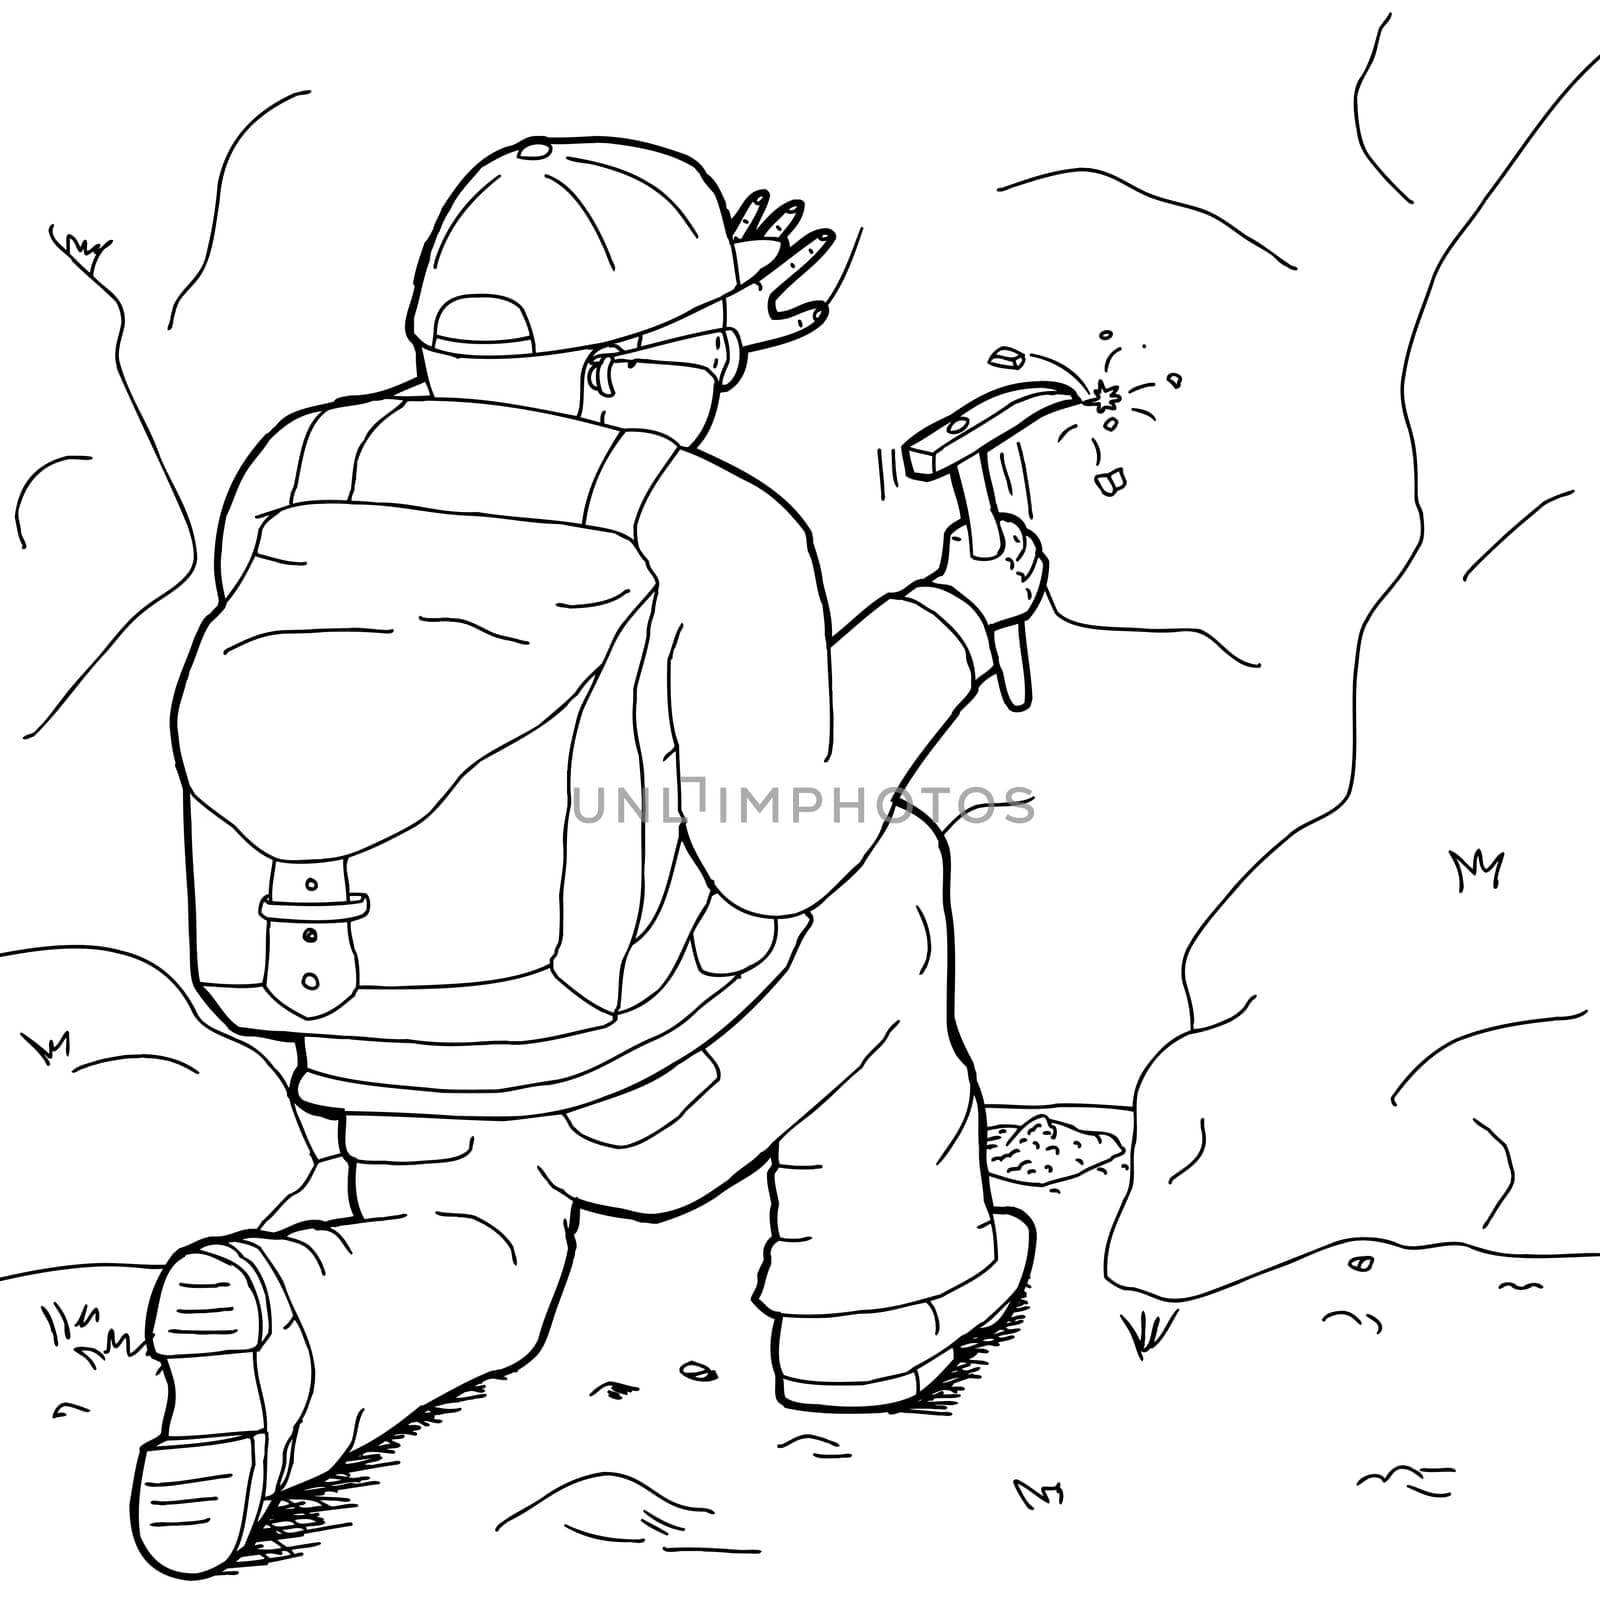 Outline of male geologist with backpack and rock hammer